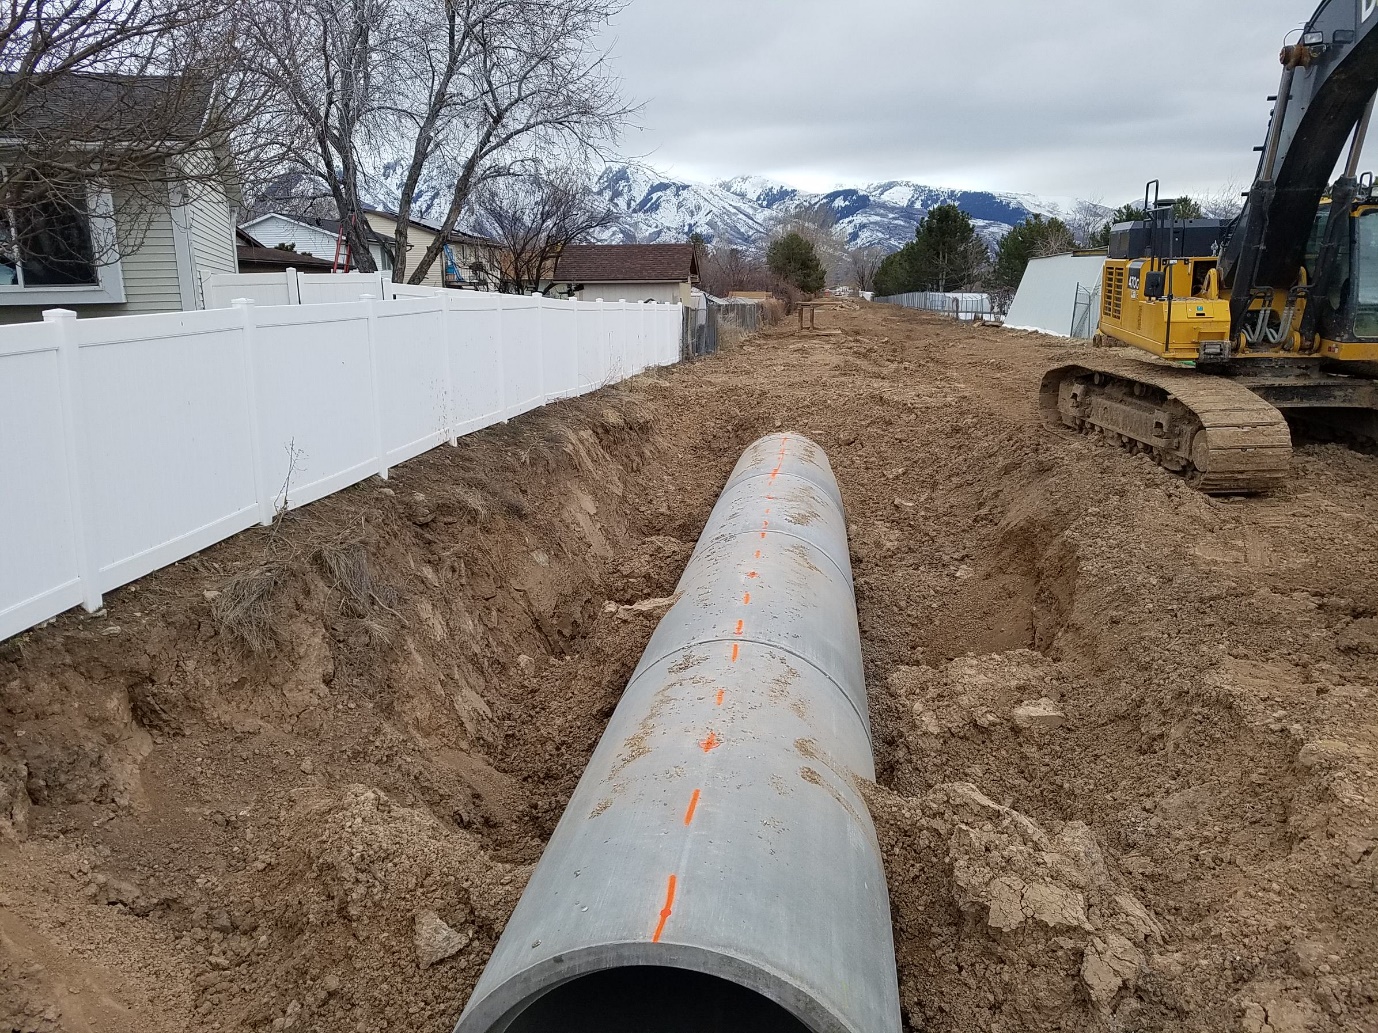 Davis and Weber Counties Canal Company’s Small Piping and Hydro Project in Utah, which was an FY 2018 Water and Energy Efficiency Grant project. Photo courtesy of Davis and Weber Counties Canal Company